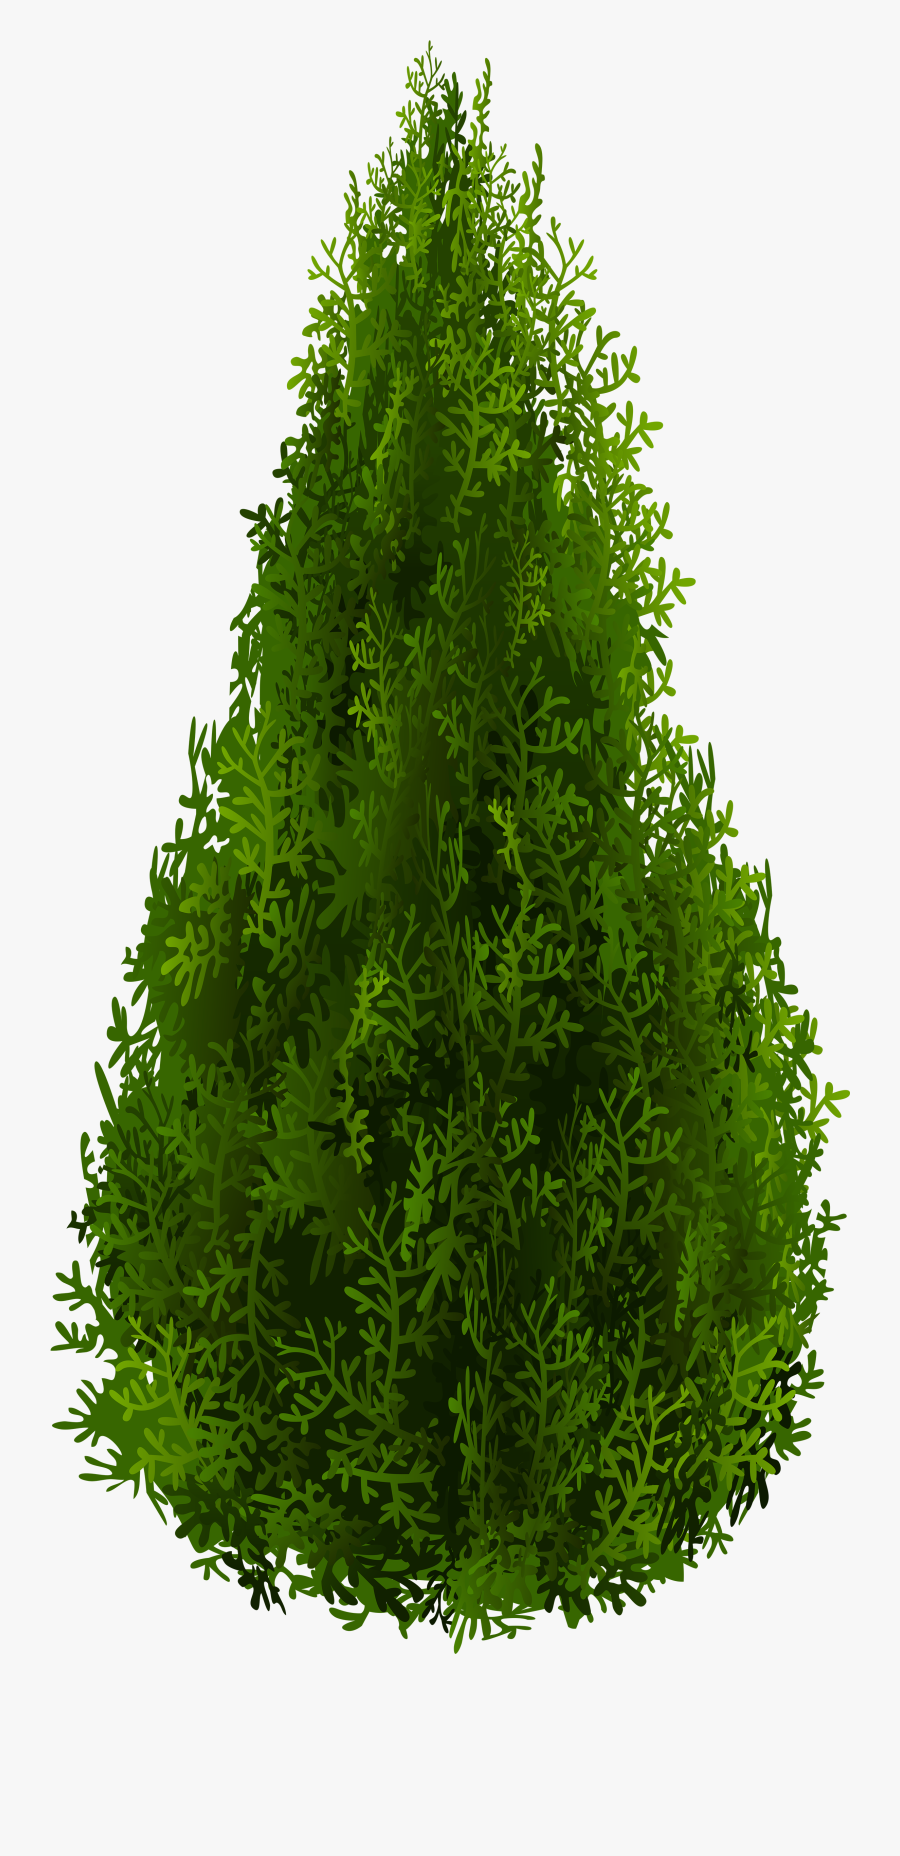 Cypress Png - Transparent Background Png Tree Hd, Transparent Clipart